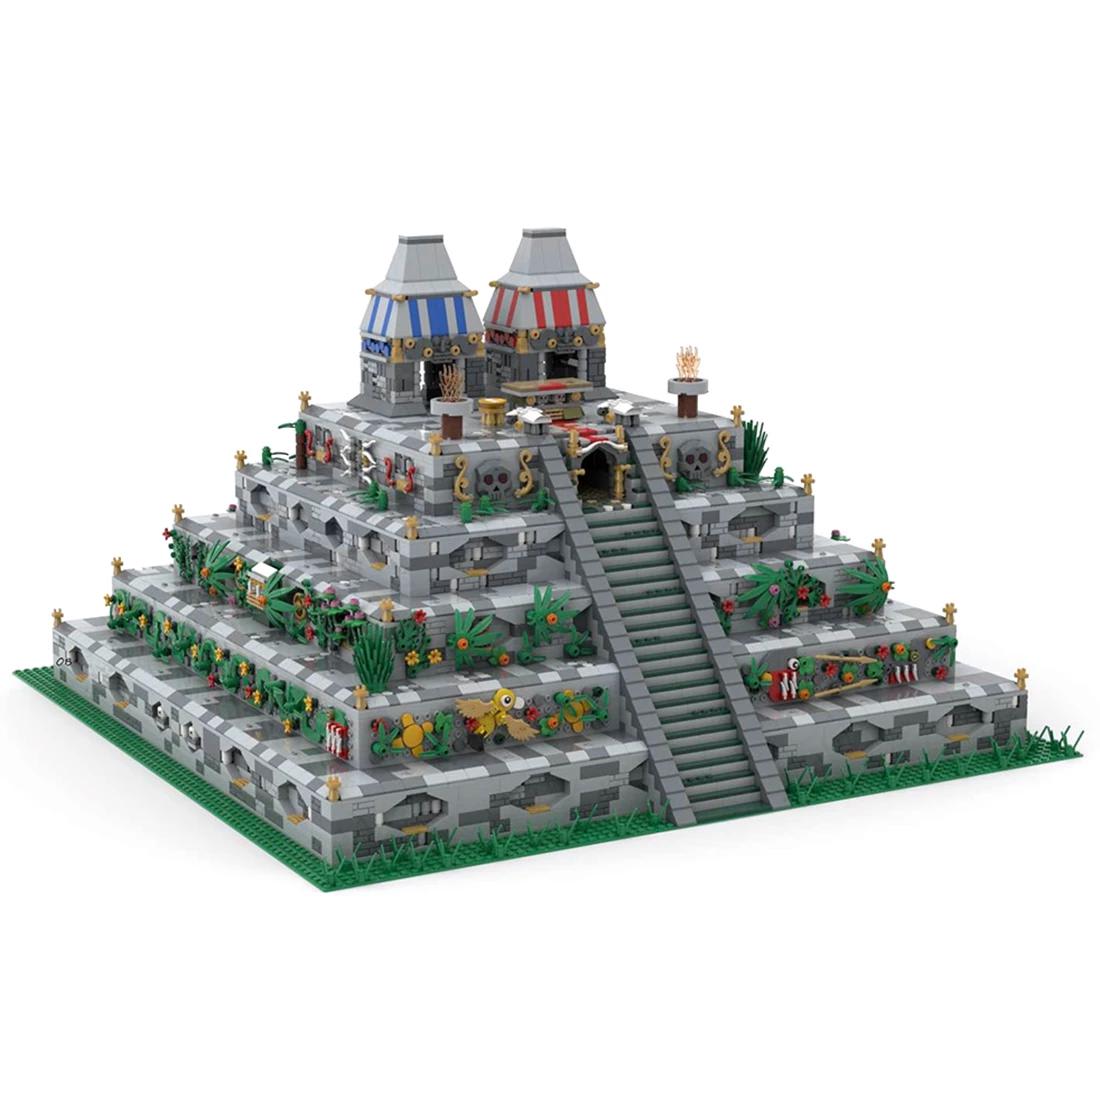 Any aztec, mayan or incan fan who wants more american civilization representation in Lego?